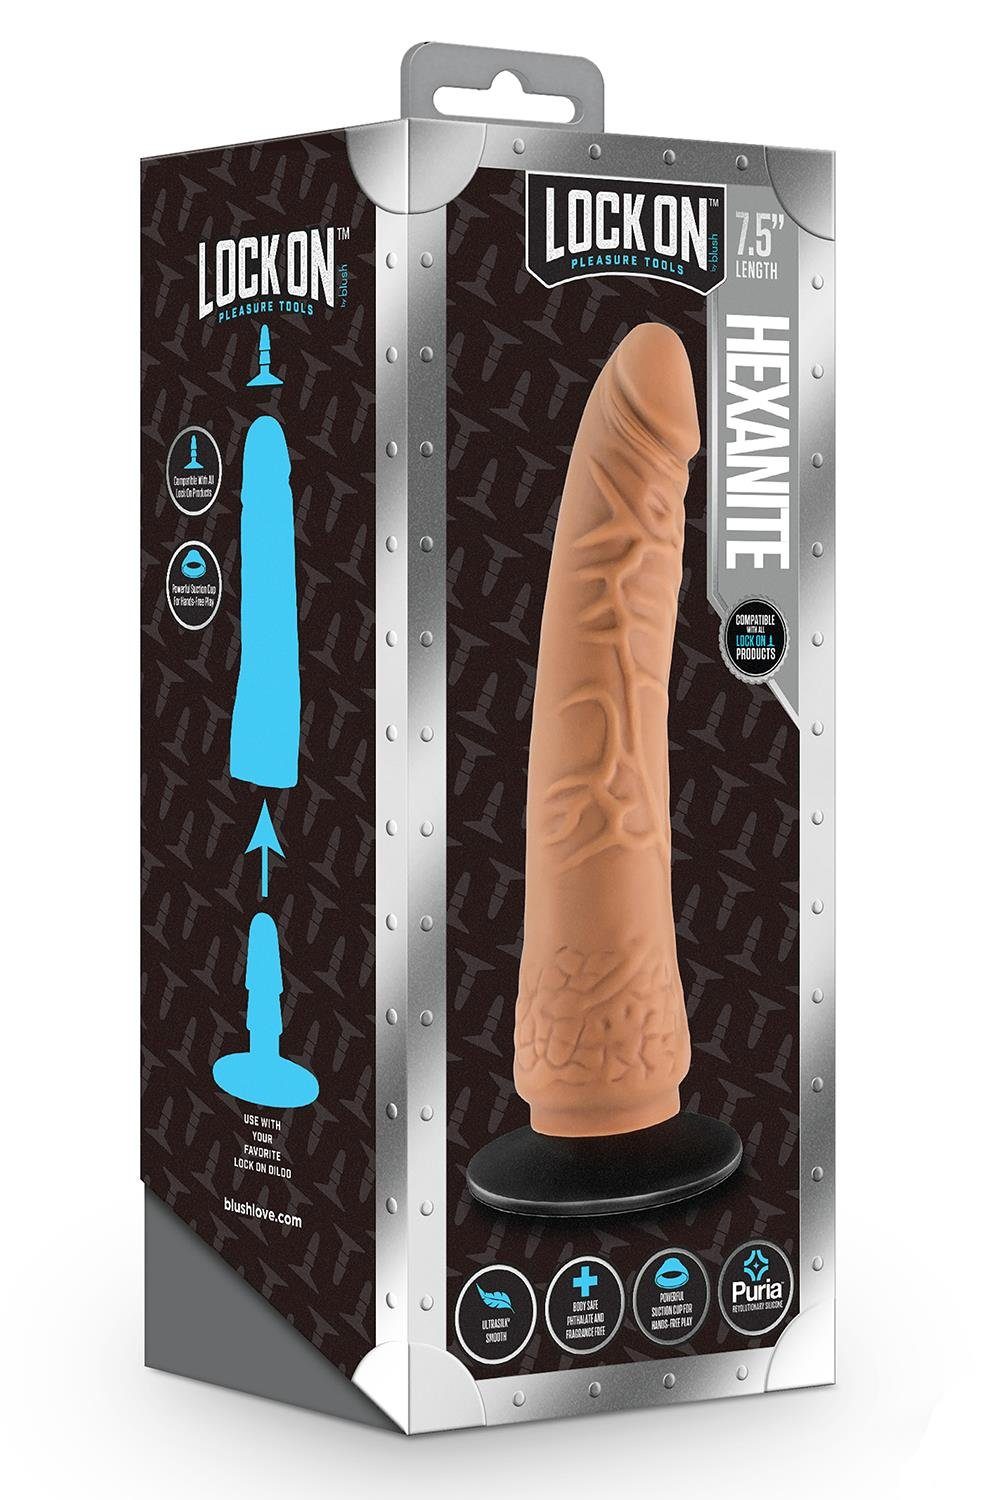 Blush Cup Mocha Lock Dildo With Hexanite 19cm On Dildo Adapter Inch Suction 7.5